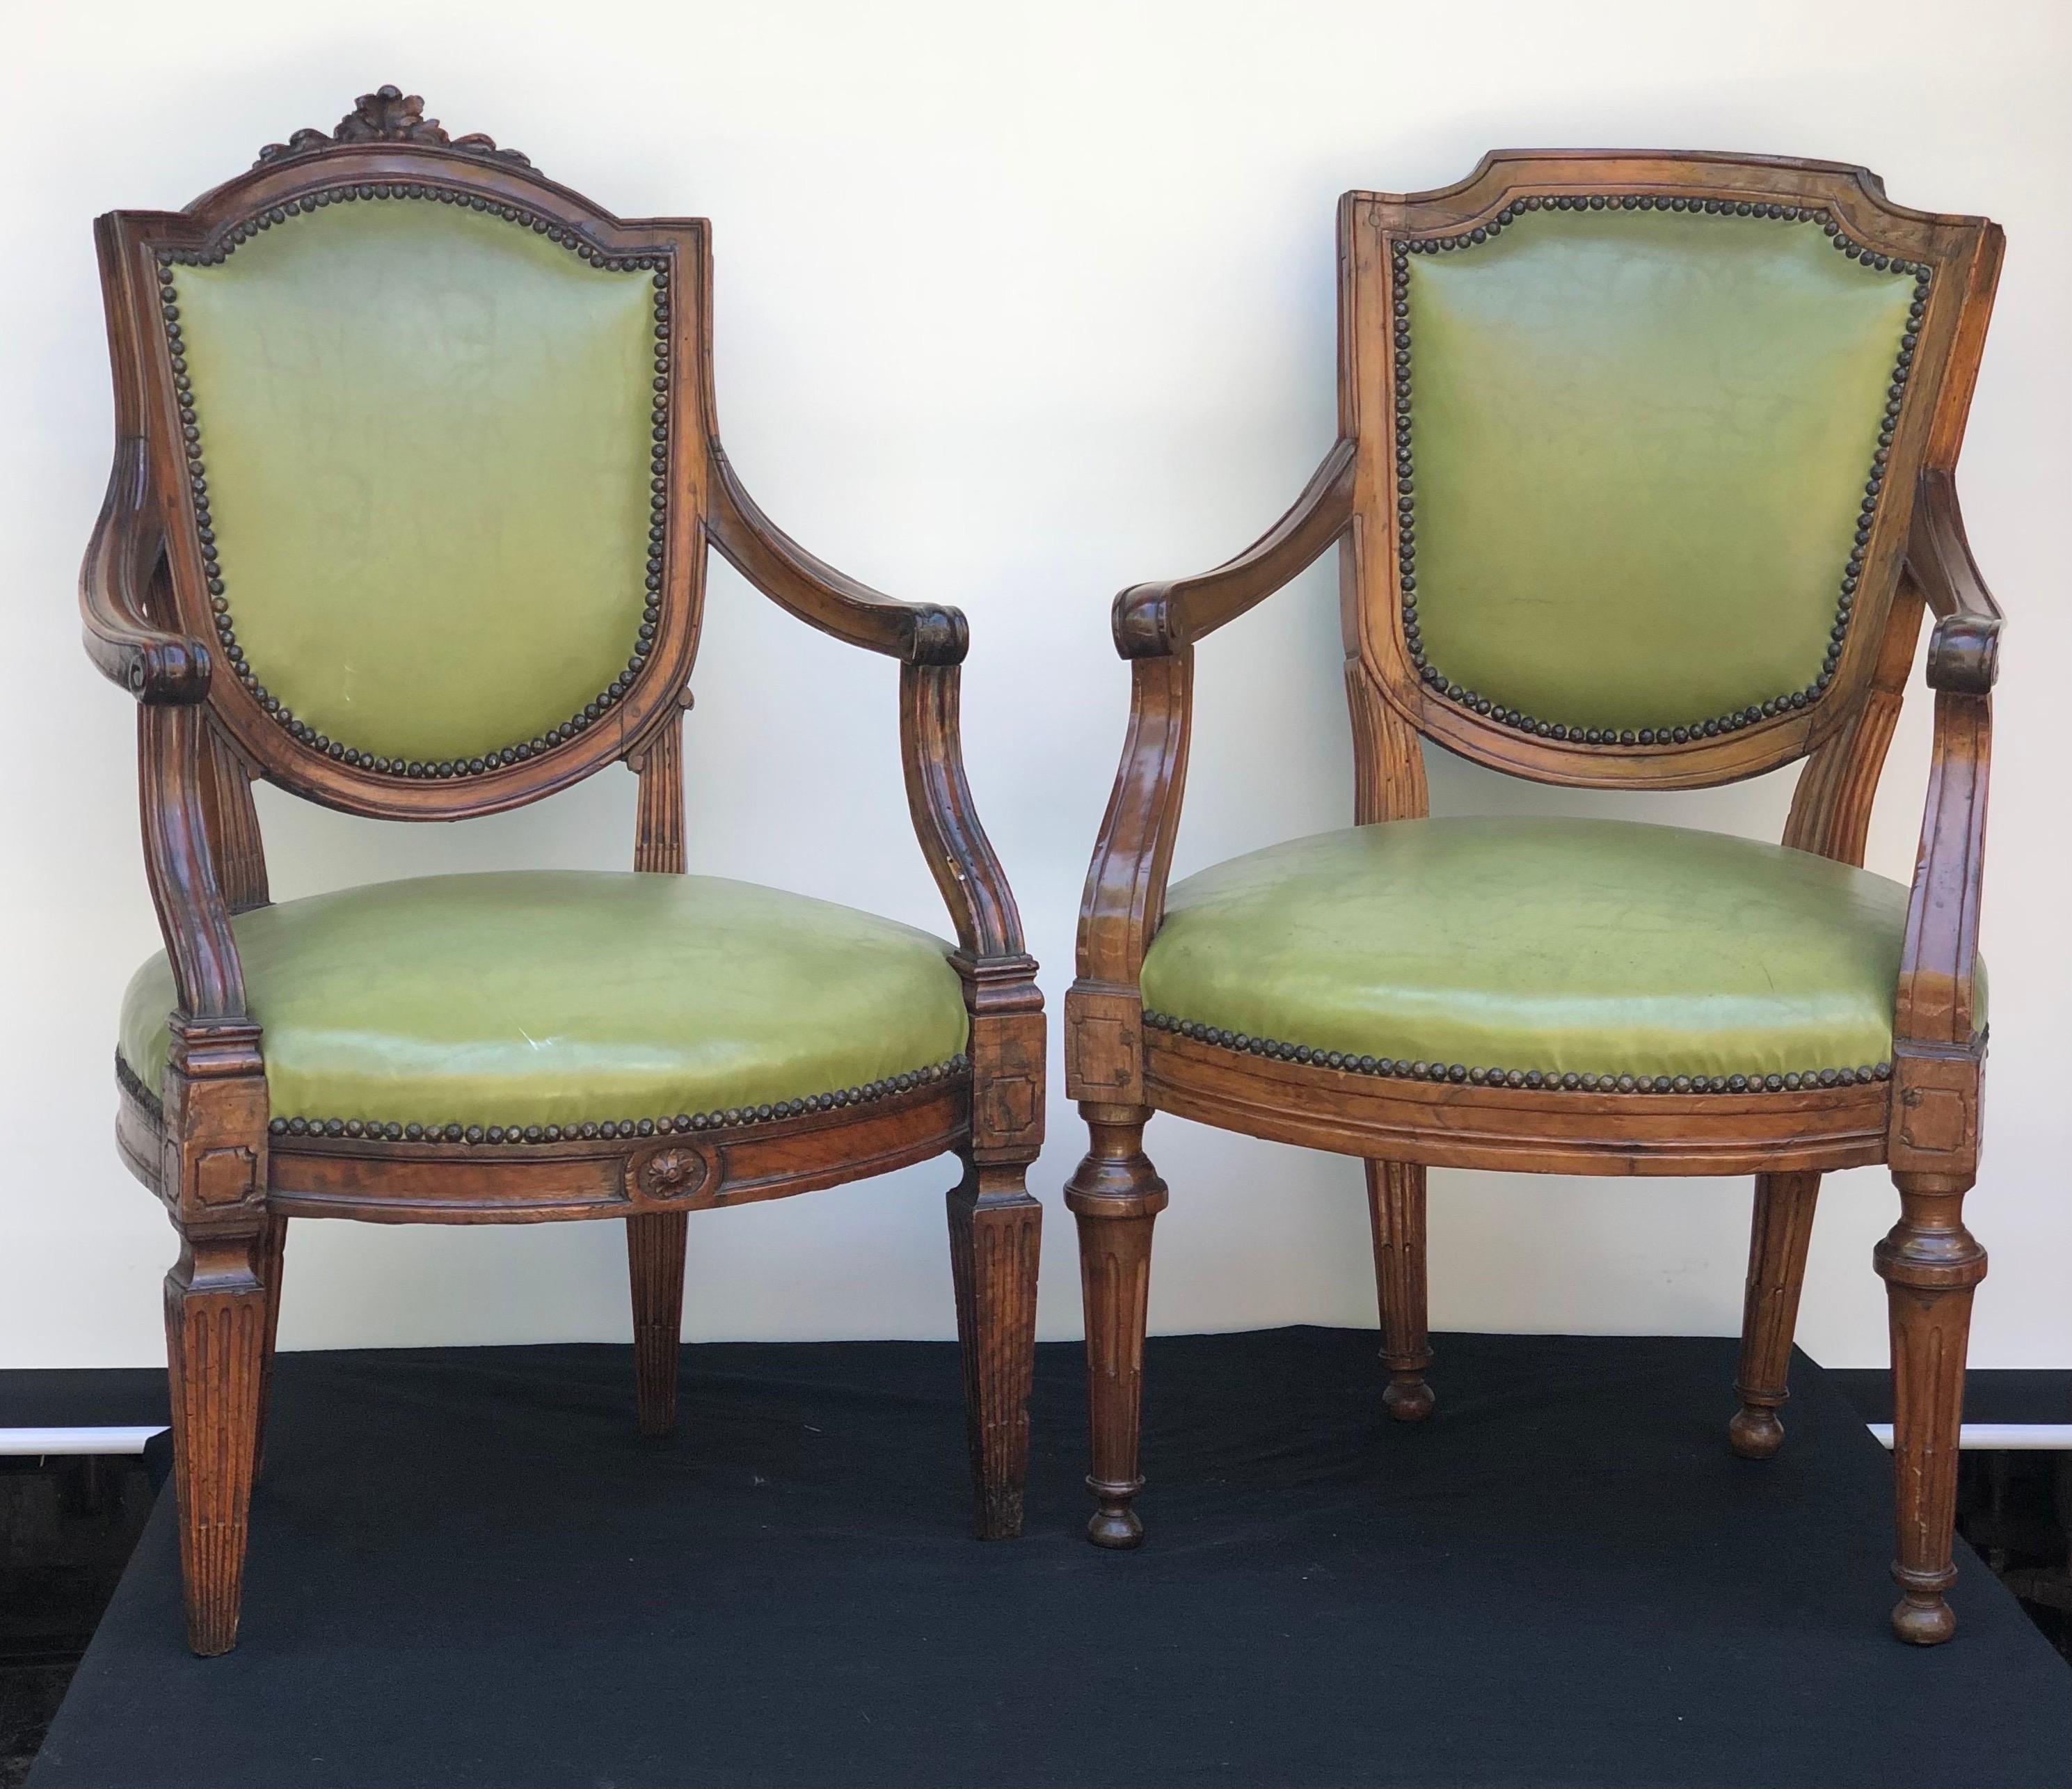 Neoclassical  18th C. Italian Leather Arm Chairs